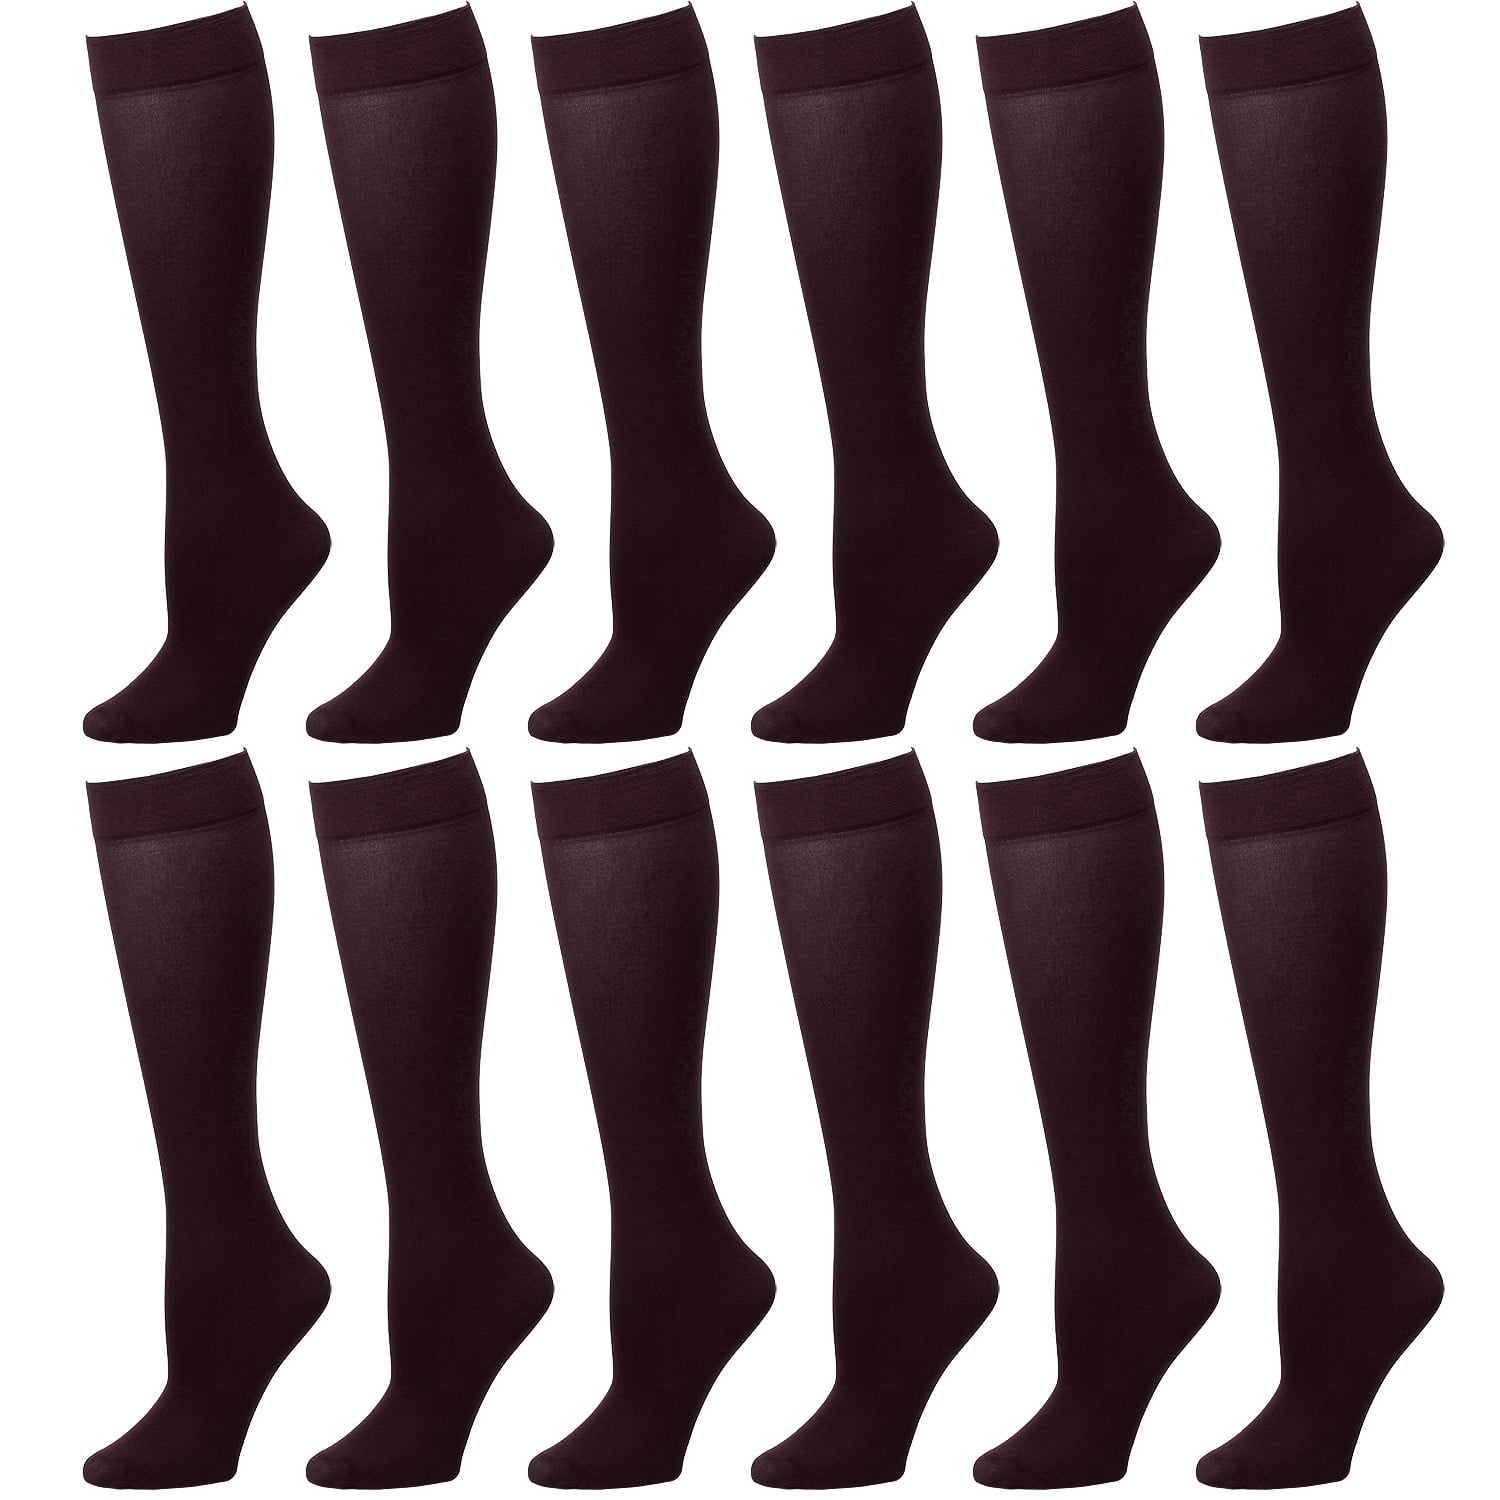 6 Pack of Women Knee High Socks Dress Trouser Socks with Comfort Band Opaque Stretchy Spandex